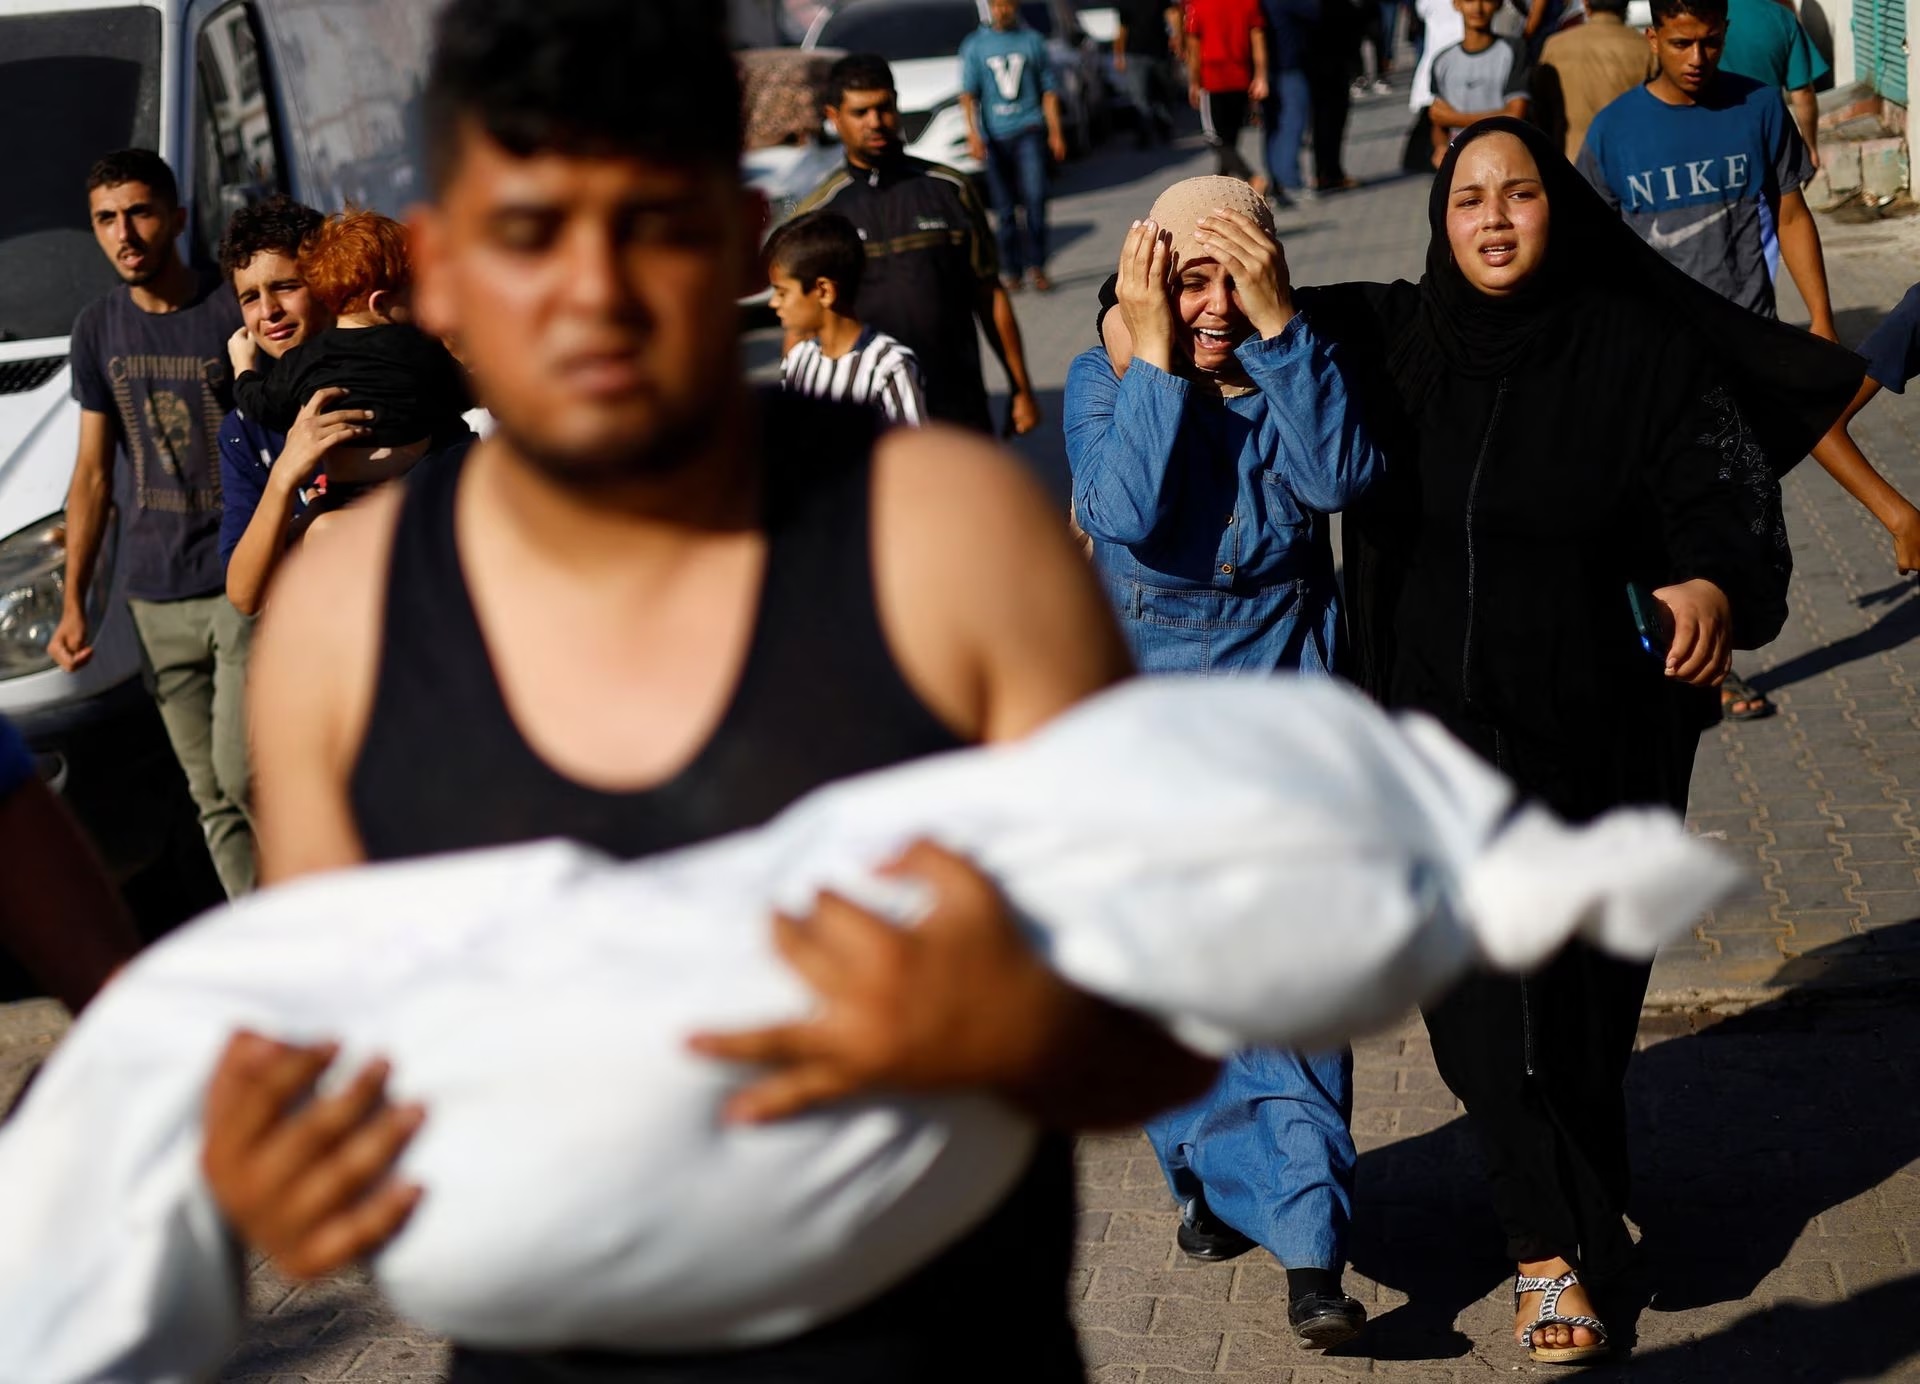 A man carries the body of a Palestinian child killed in Israeli strikes as mourners react, outside a hospital in Khan Younis in the southern Gaza Strip, October 17.